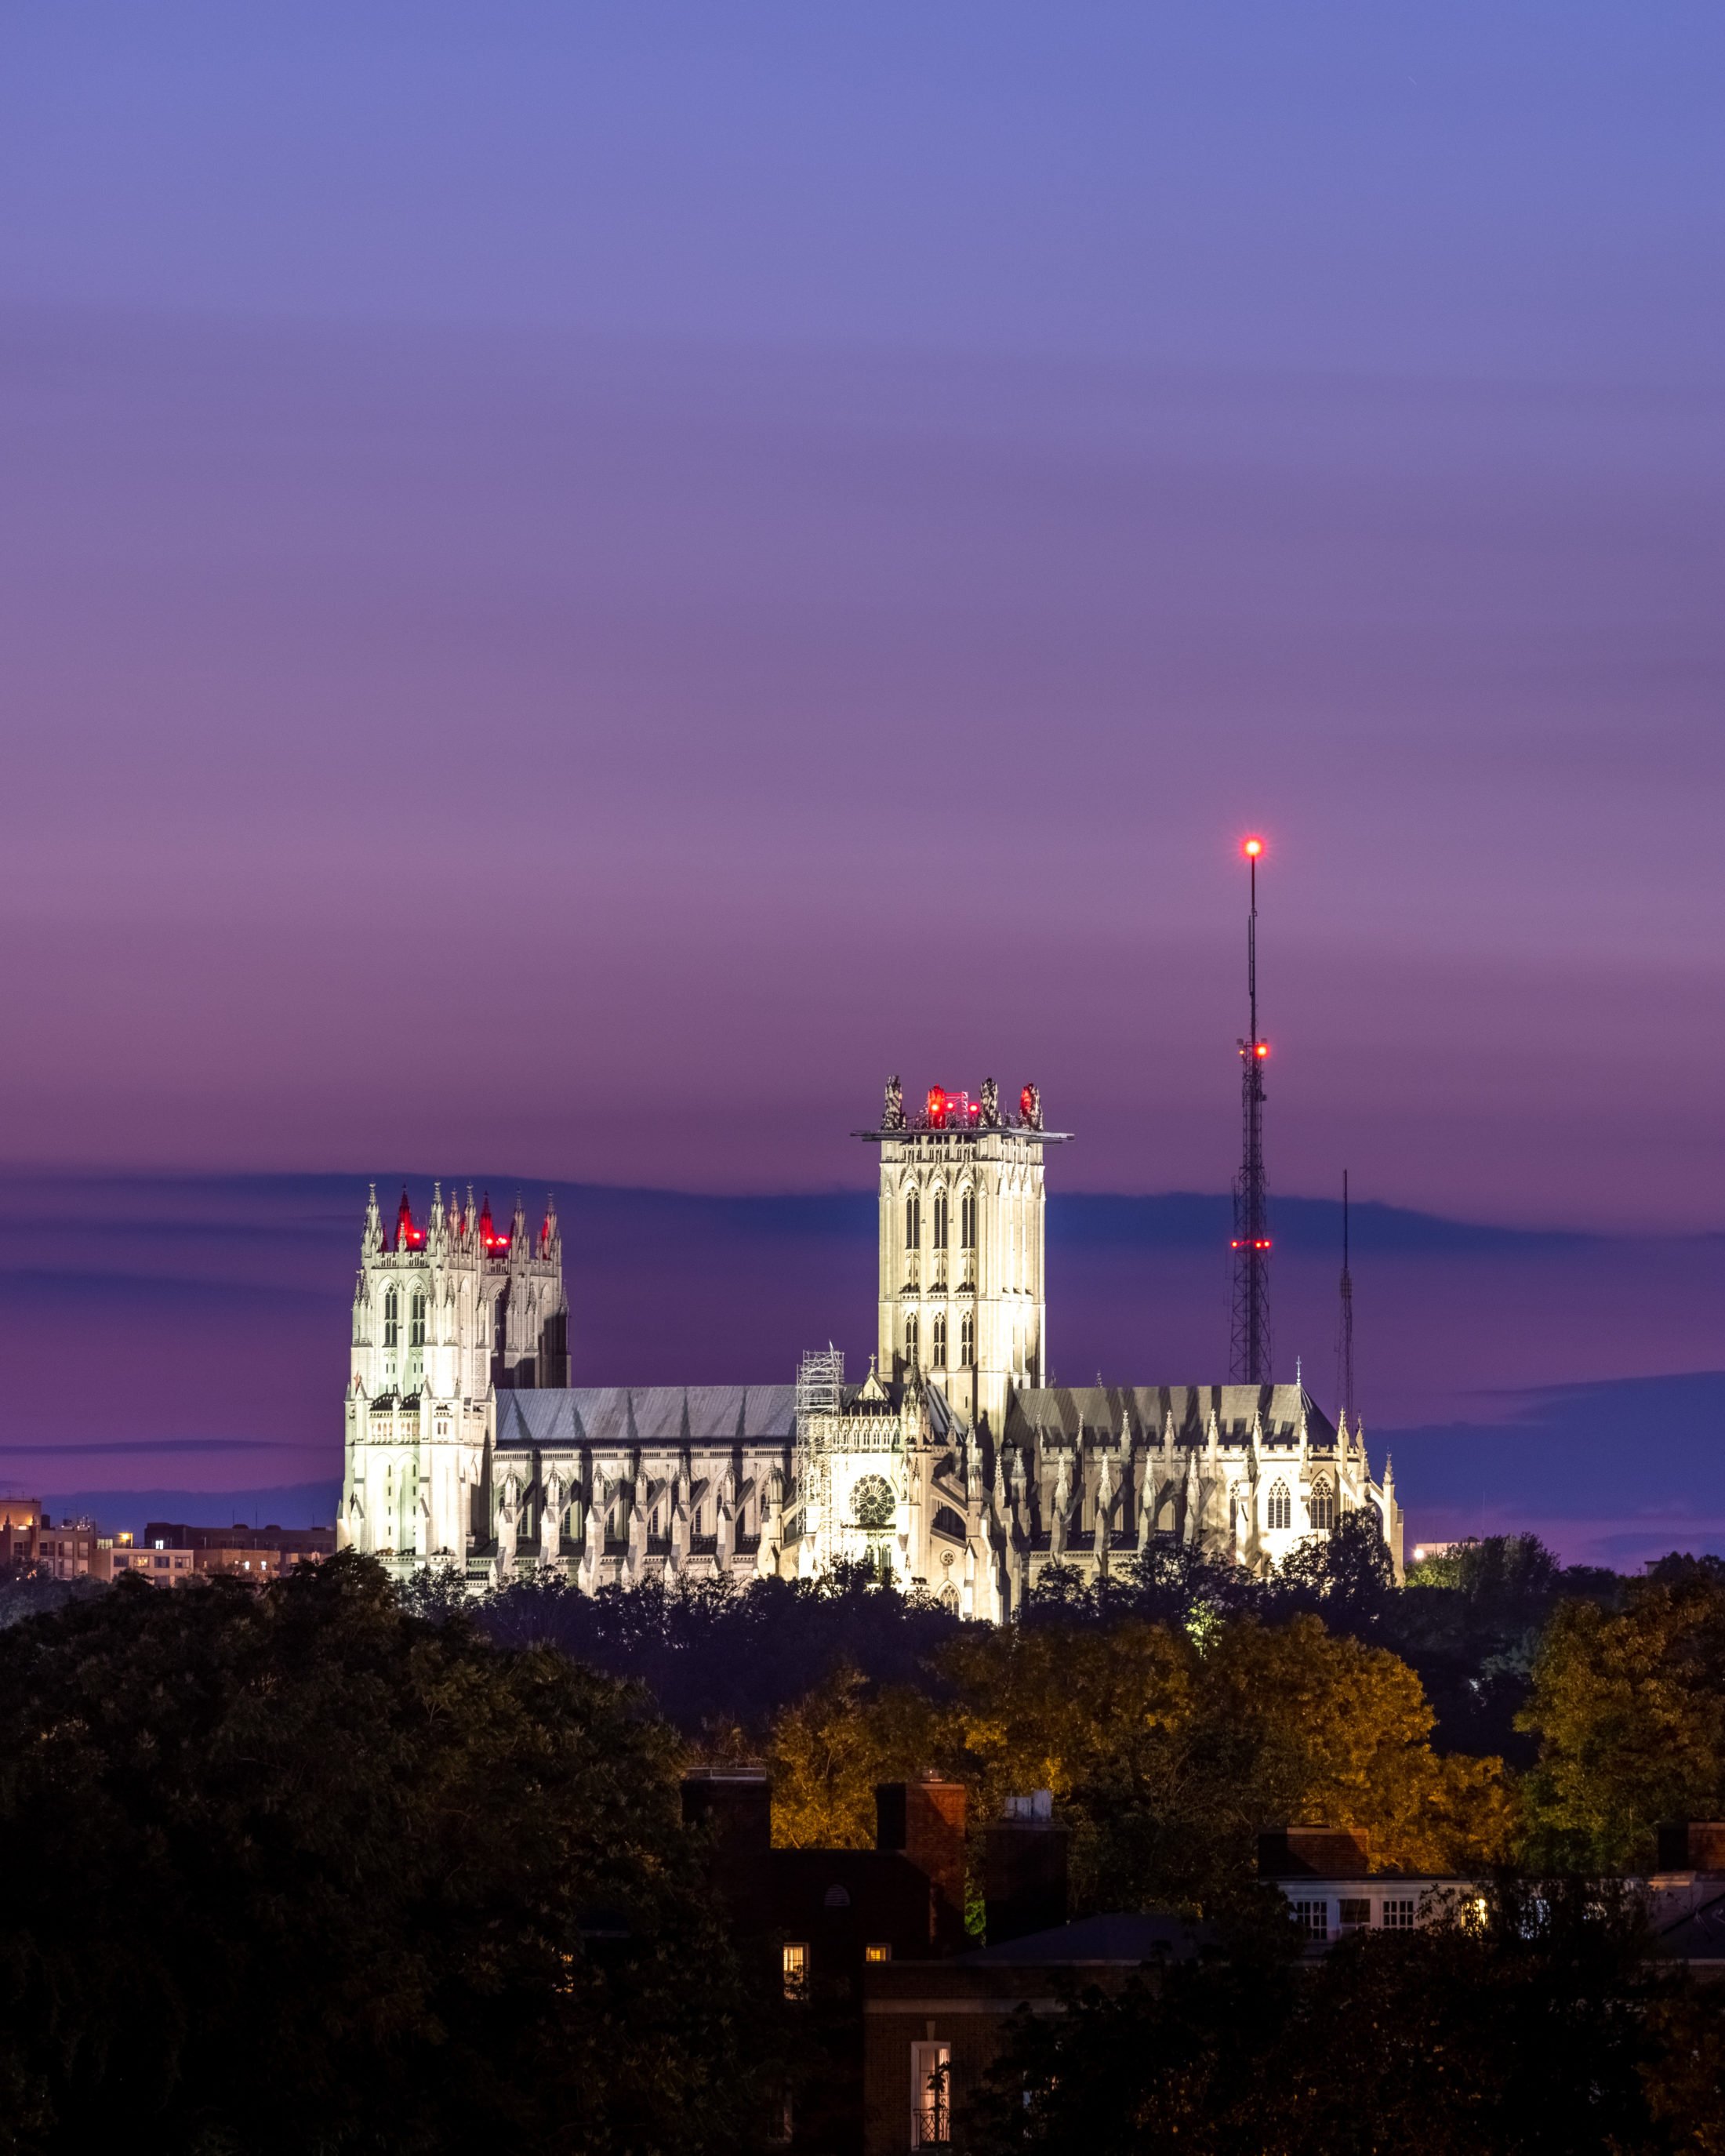 Visiting the National Cathedral in Washington DC (Photos)